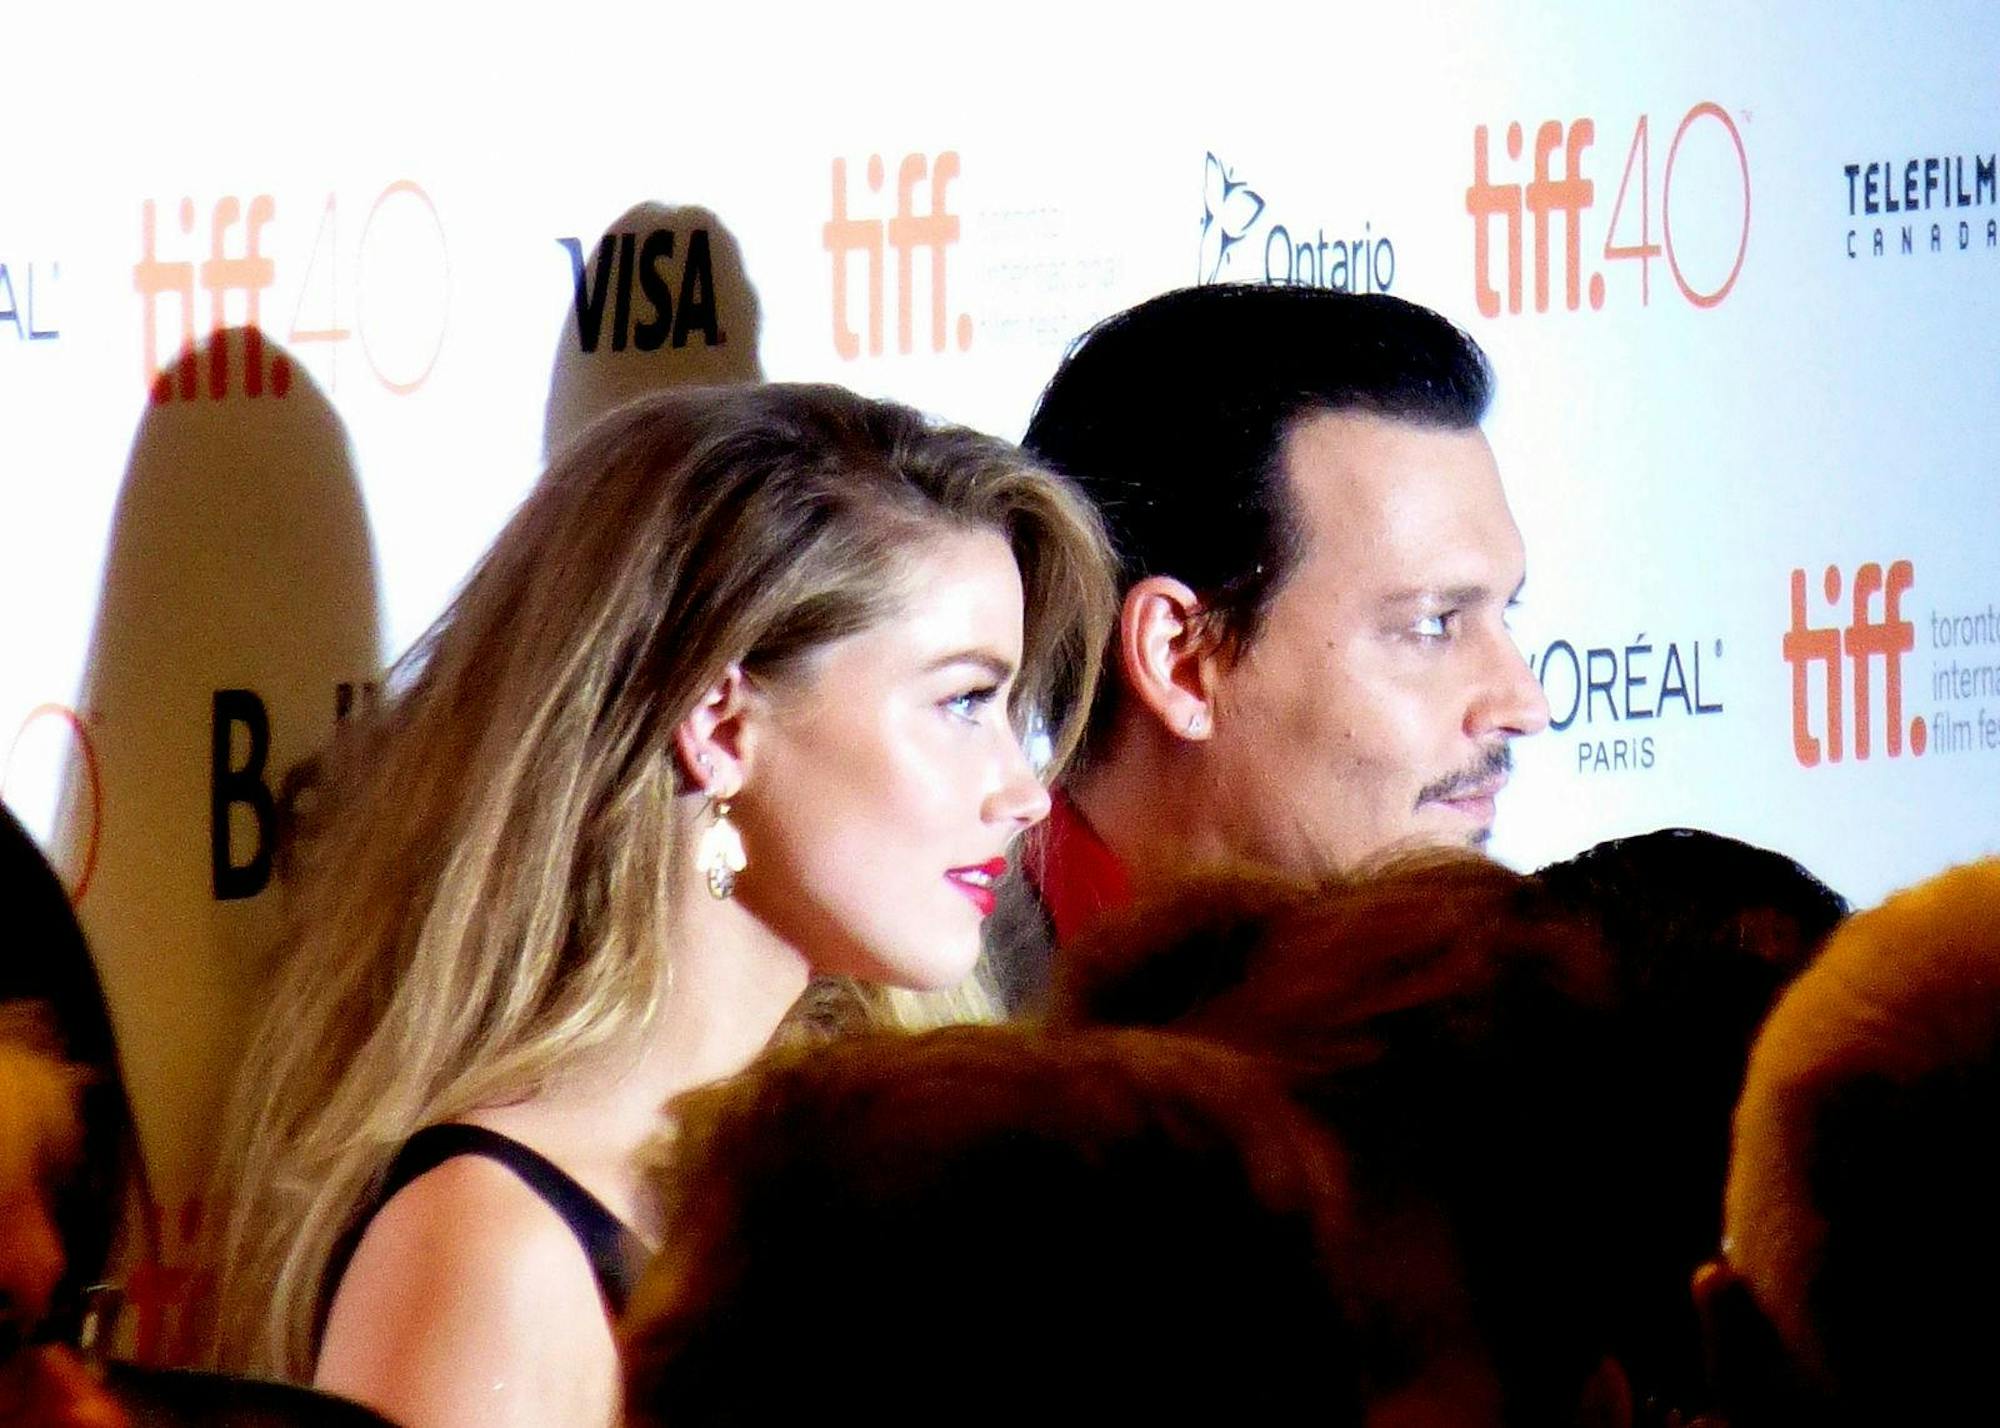 Amber Heard and Johnny Depp are pictured.